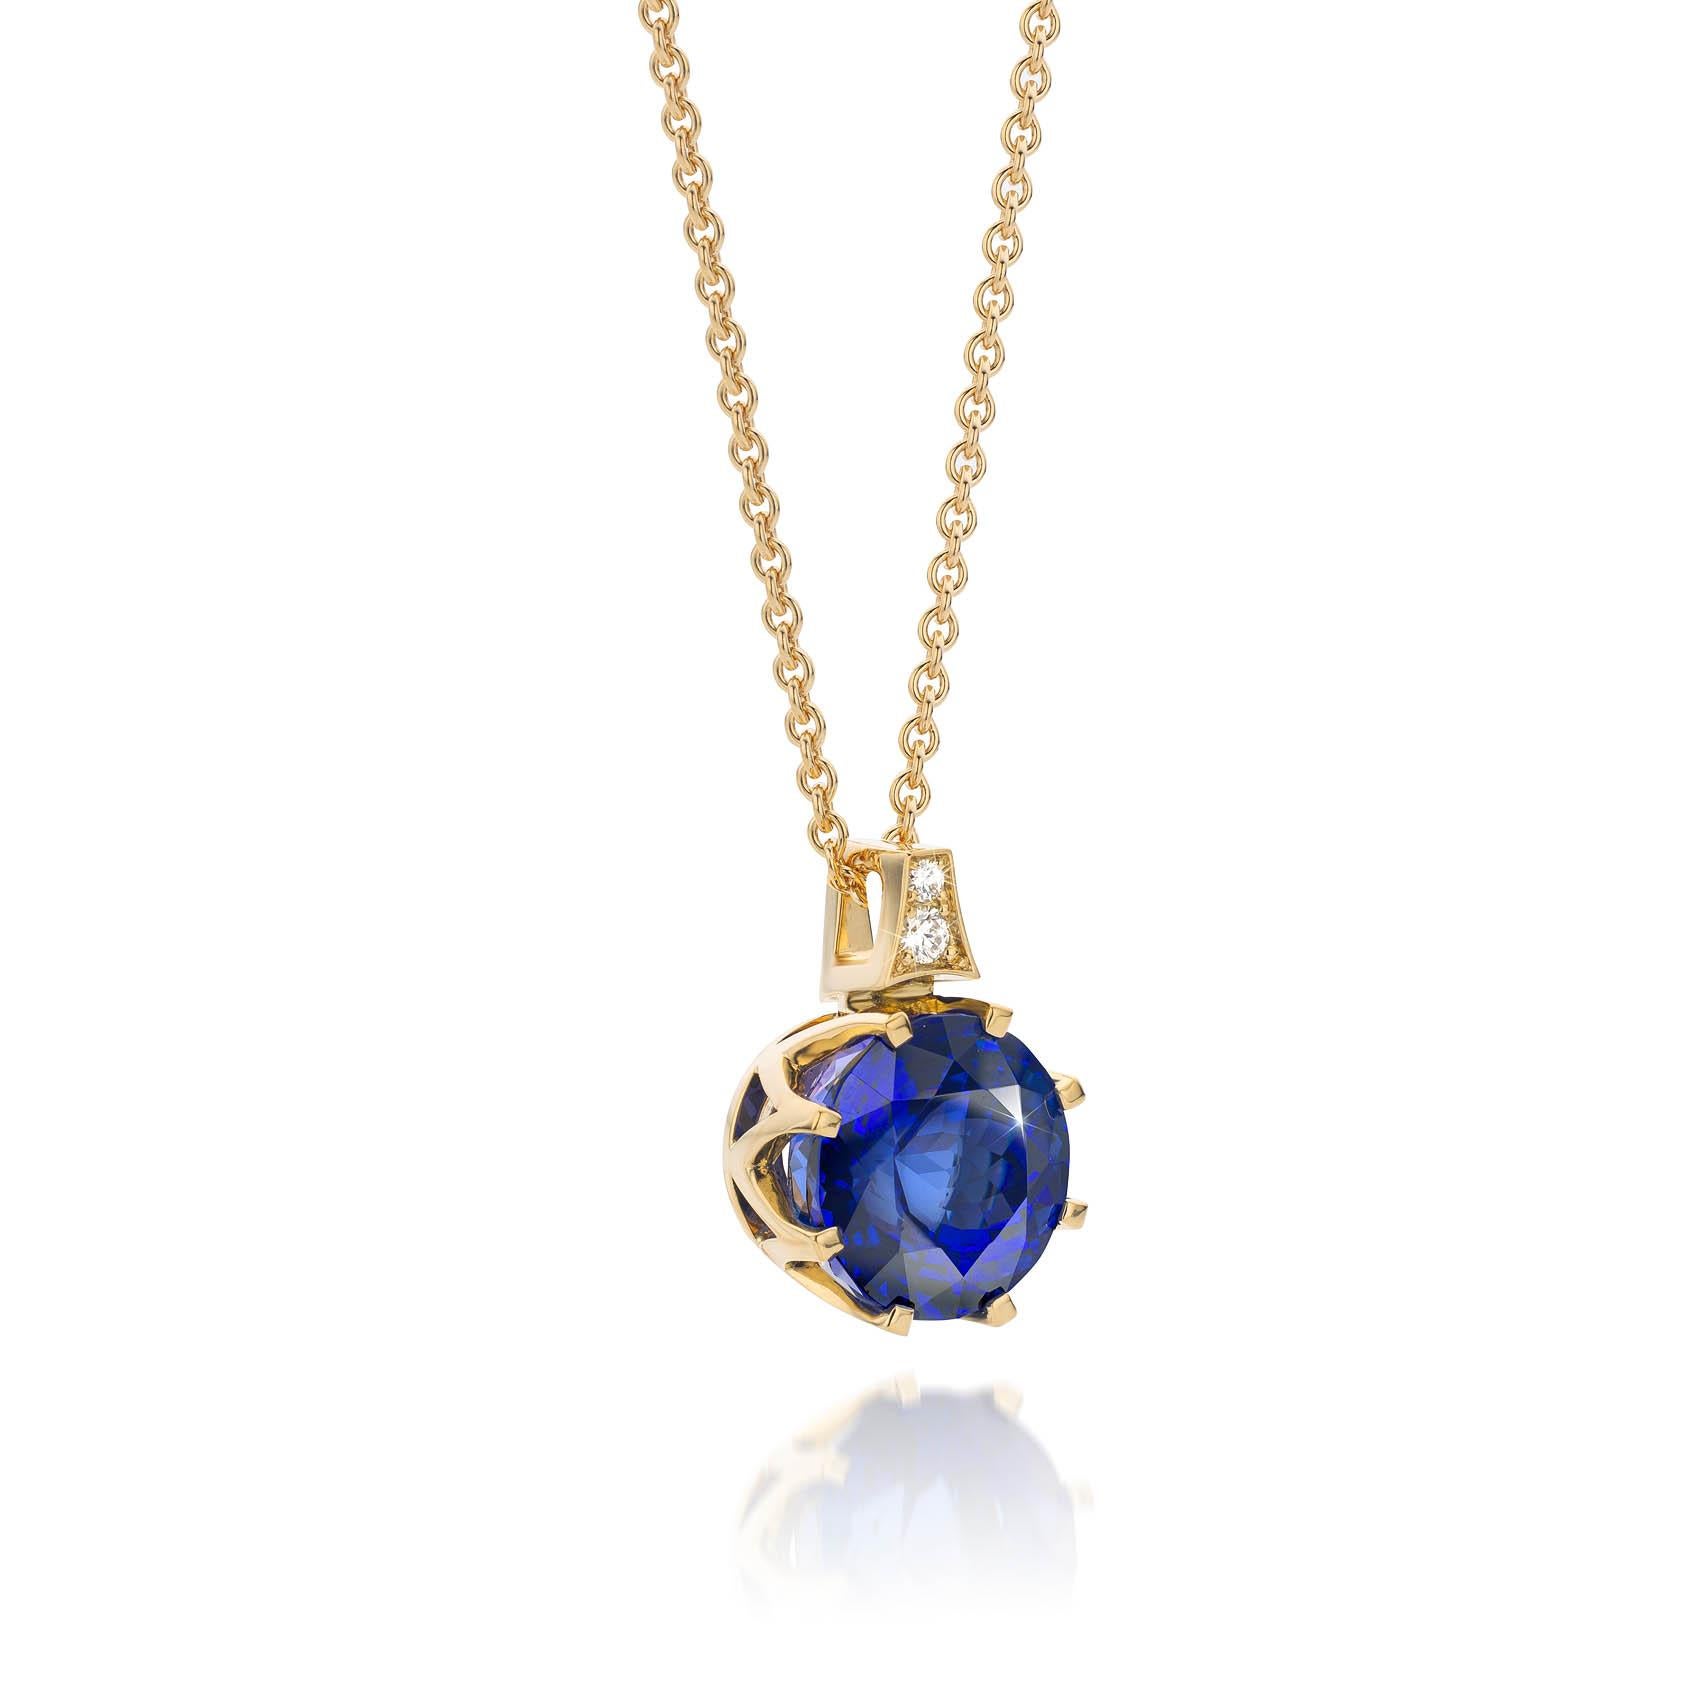 We invite you to see more of our collection from Cober Jewellery at 1stDibs!
You can type Cober Jewellery in the search bar to view more of our pieces of jewellery at our webshop.

African dream with 15.56 ct. Tanzanite and 2 Diamonds Pendant  Cober